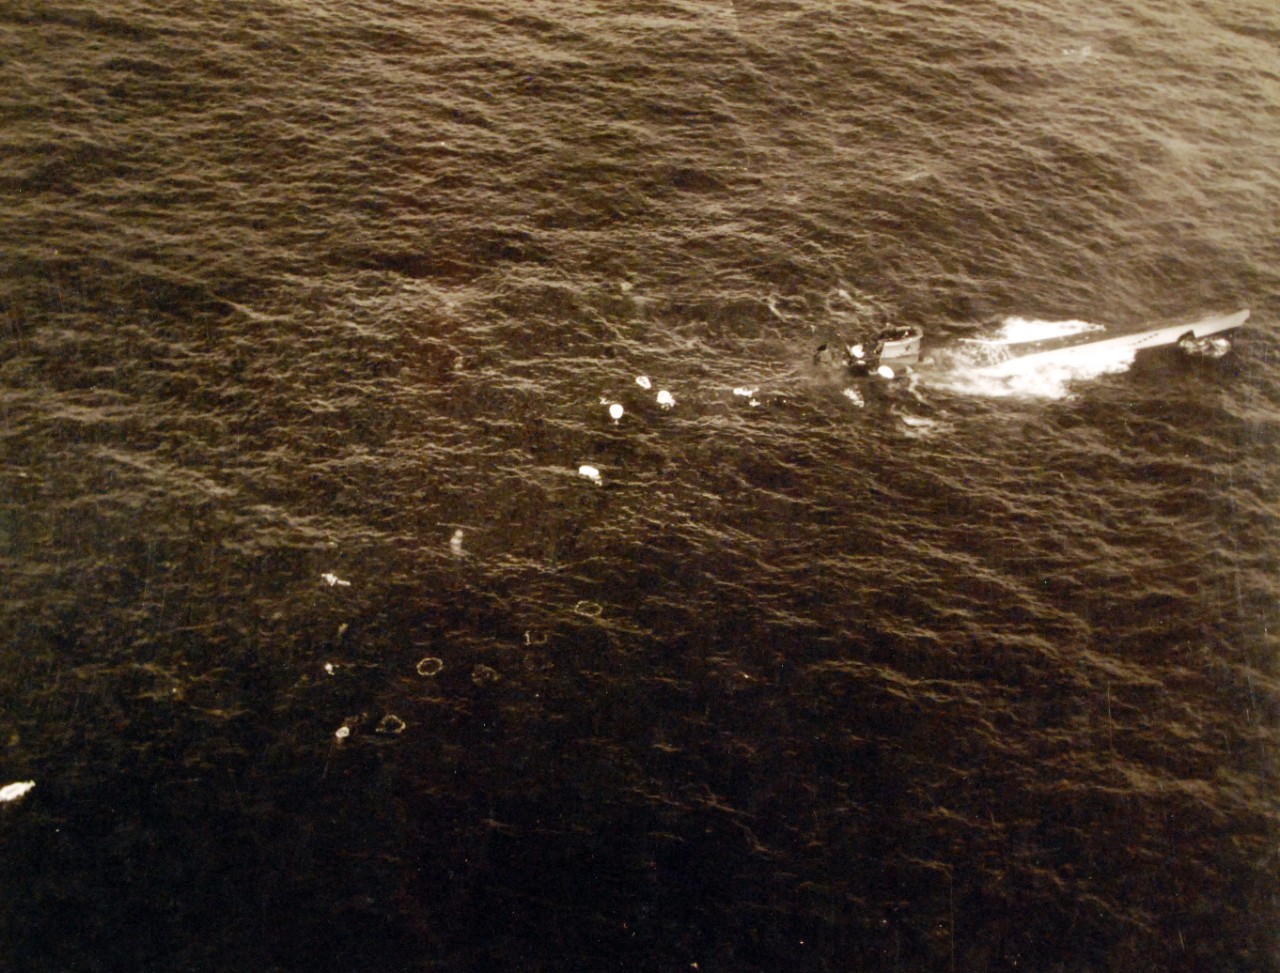 <p>80-G-79393: Air Attacks on German U-boats, WWII. German U-boat incident #3992. Plane attack, August 9, 1943, on German submarine U-664. The submarine is shown sinking after an attack by Lieutenant Junior Grade G.G. Hogan, USNR. Forty-four survivors were picked up and taken onboard USS Card (CVE-11).&nbsp;</p>
